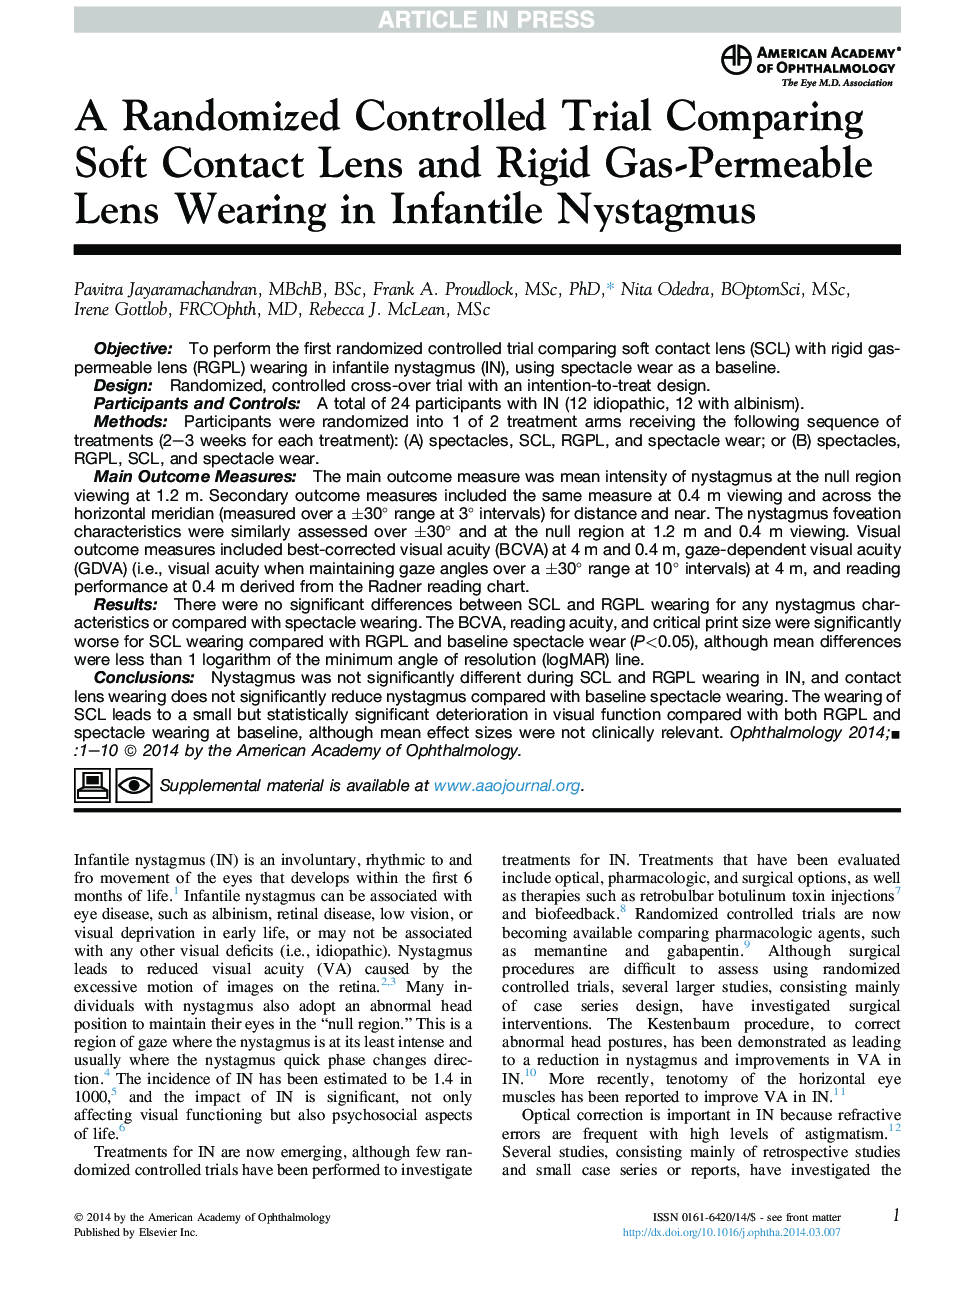 A Randomized Controlled Trial Comparing Soft Contact Lens and Rigid Gas-Permeable Lens Wearing in Infantile Nystagmus